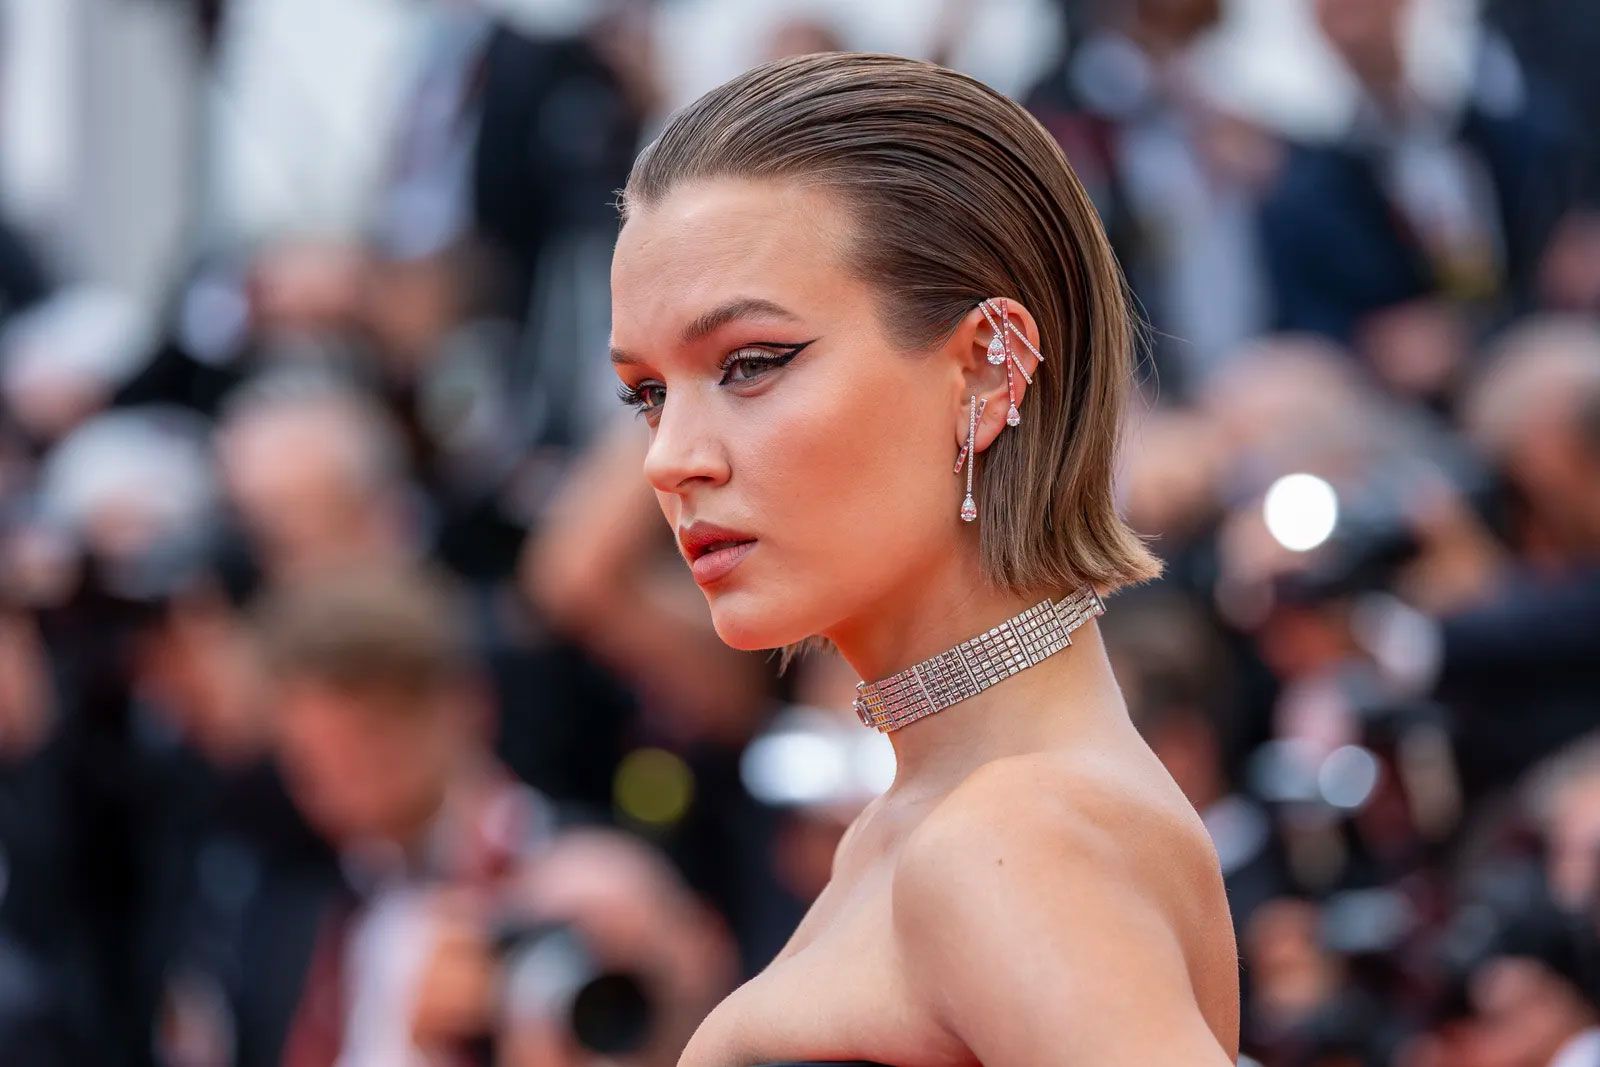 Josephine Skriver in Messika diamond jewellery at the Cannes Film Festival 2022